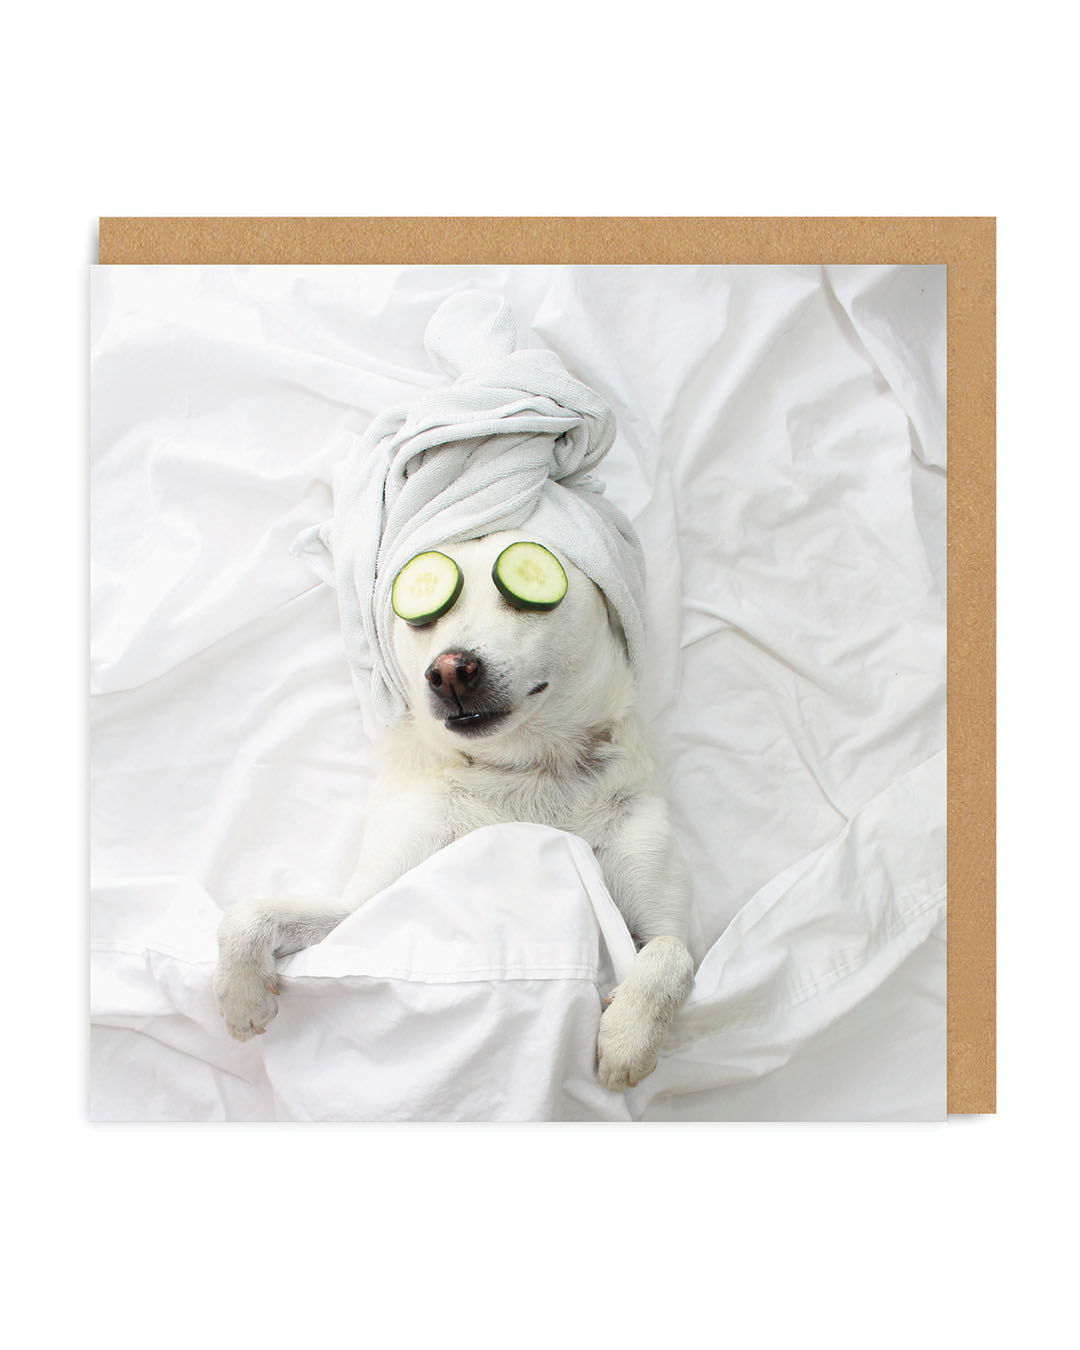 Pampered Pooch Square Greeting Card